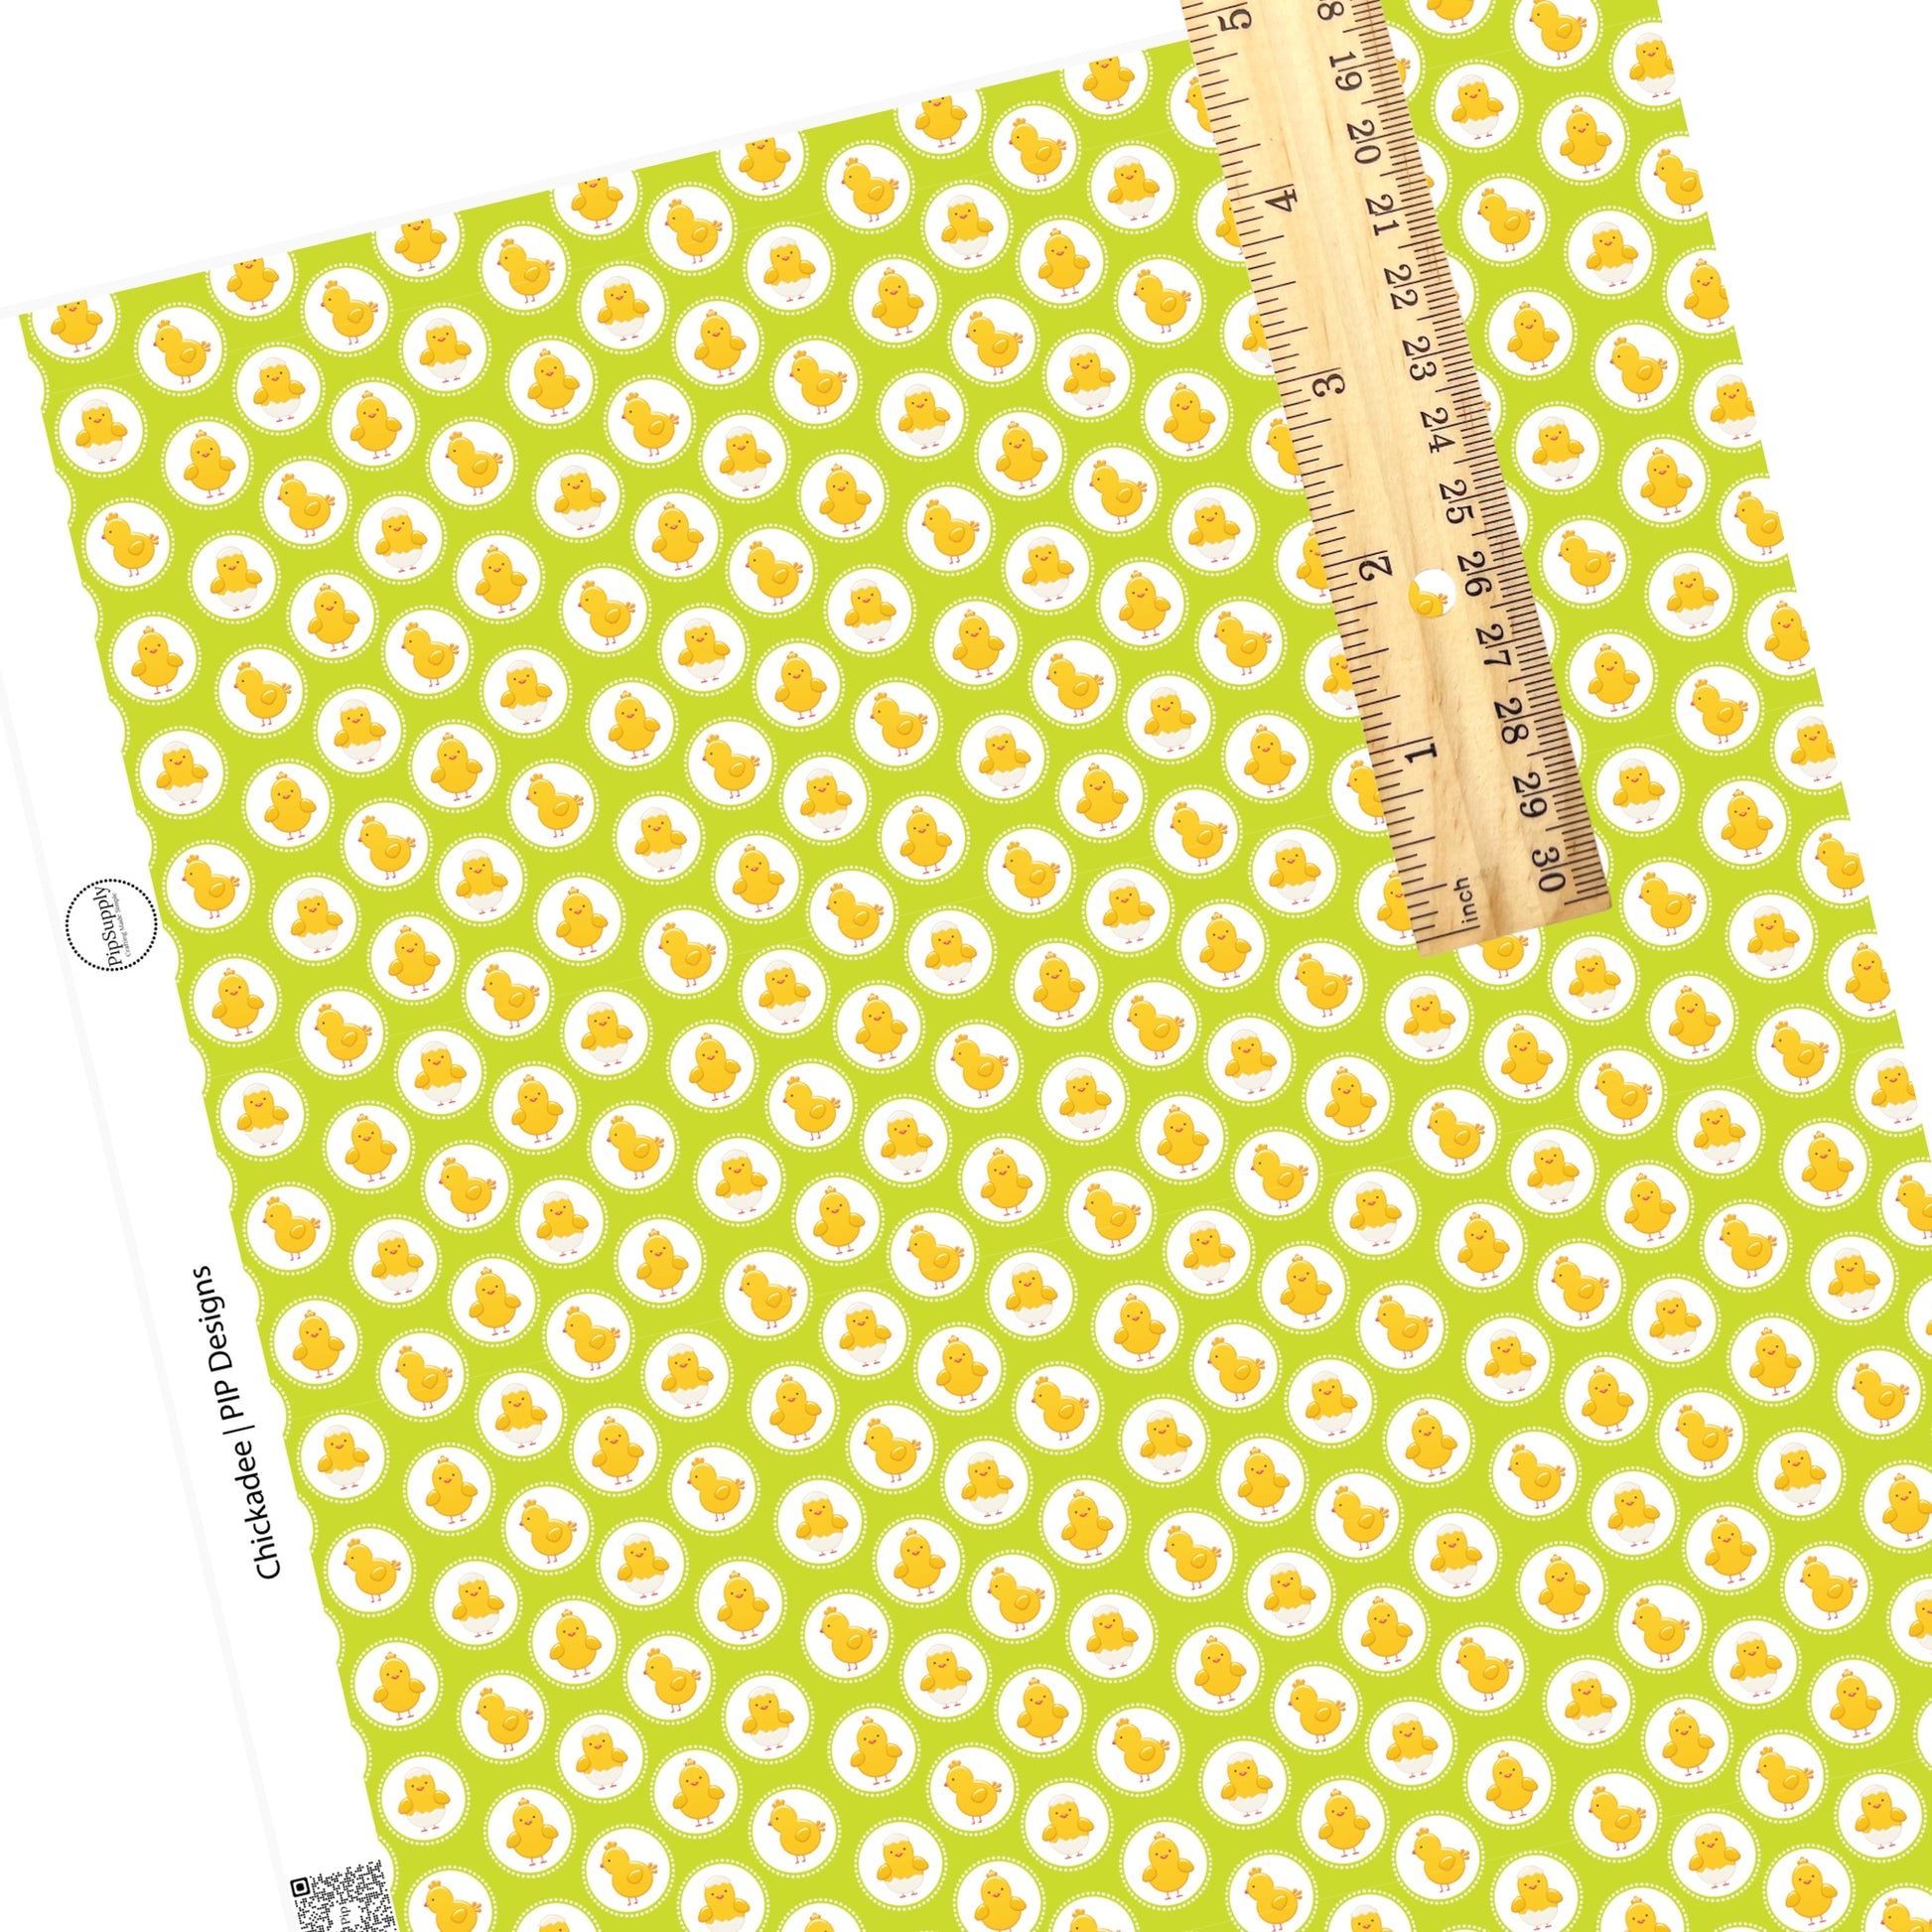 Baby chicks on polka dots on green faux leather sheets